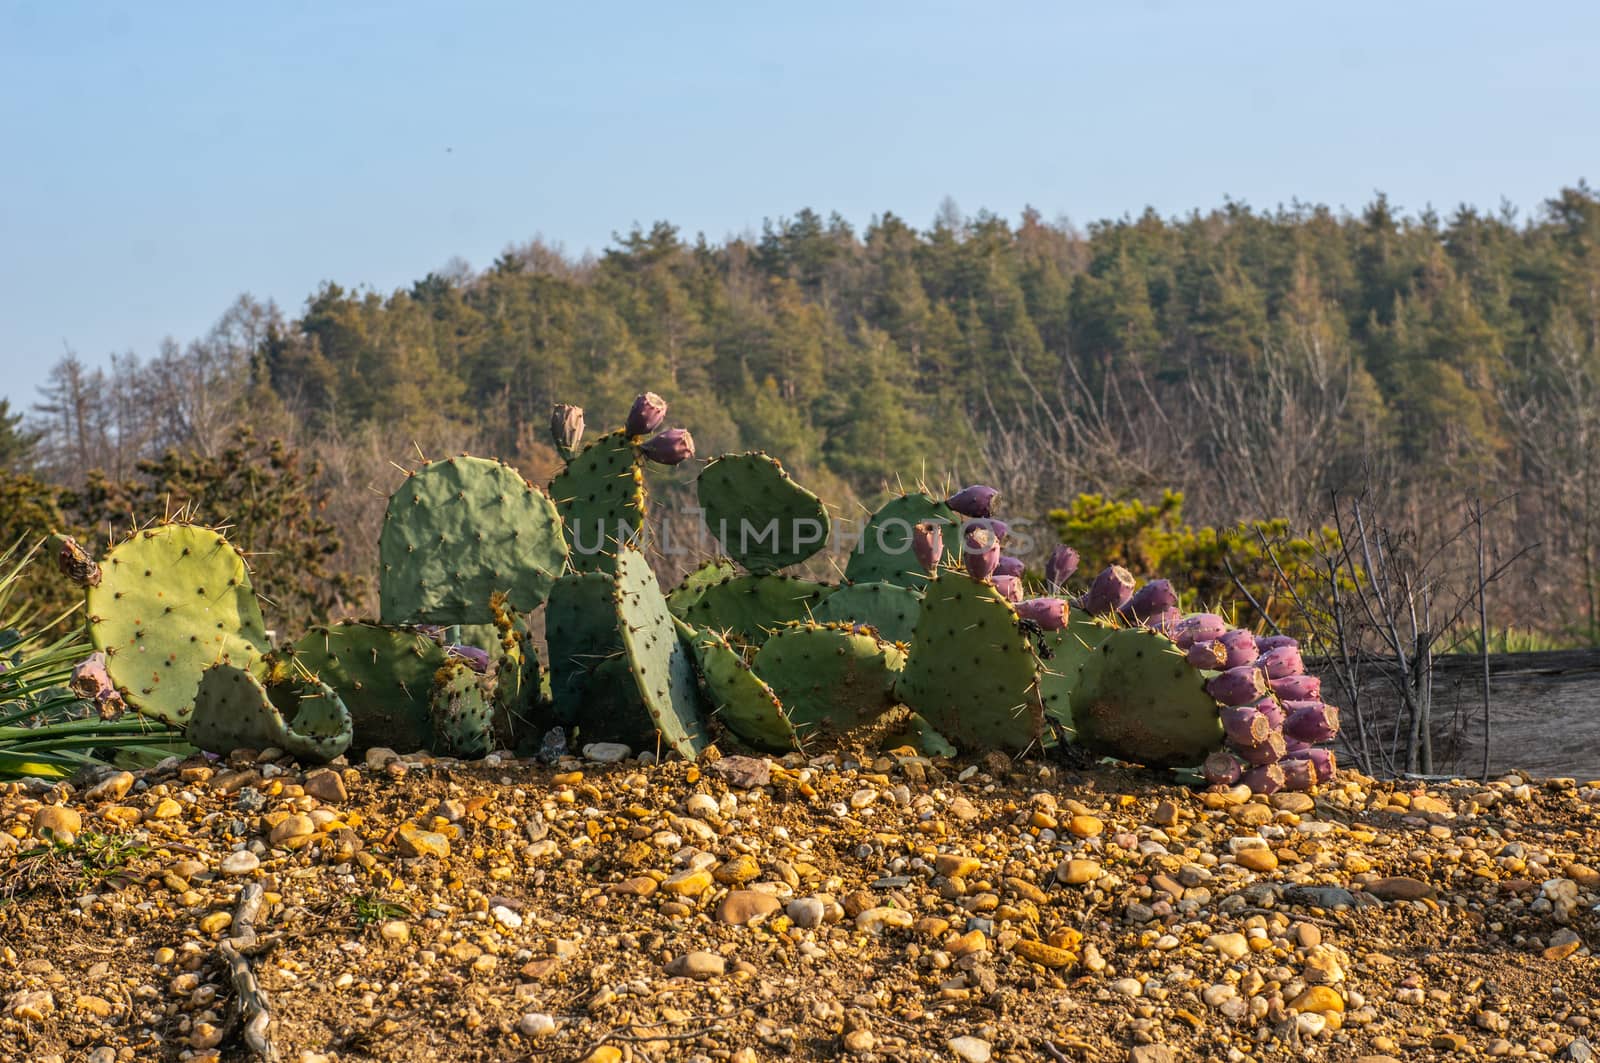 Horizon of vibrant green prickly pear, Opuntia cactus in a row with pink fruits growing on them. Saturated colours and warm light on the beige gravel in the forground.